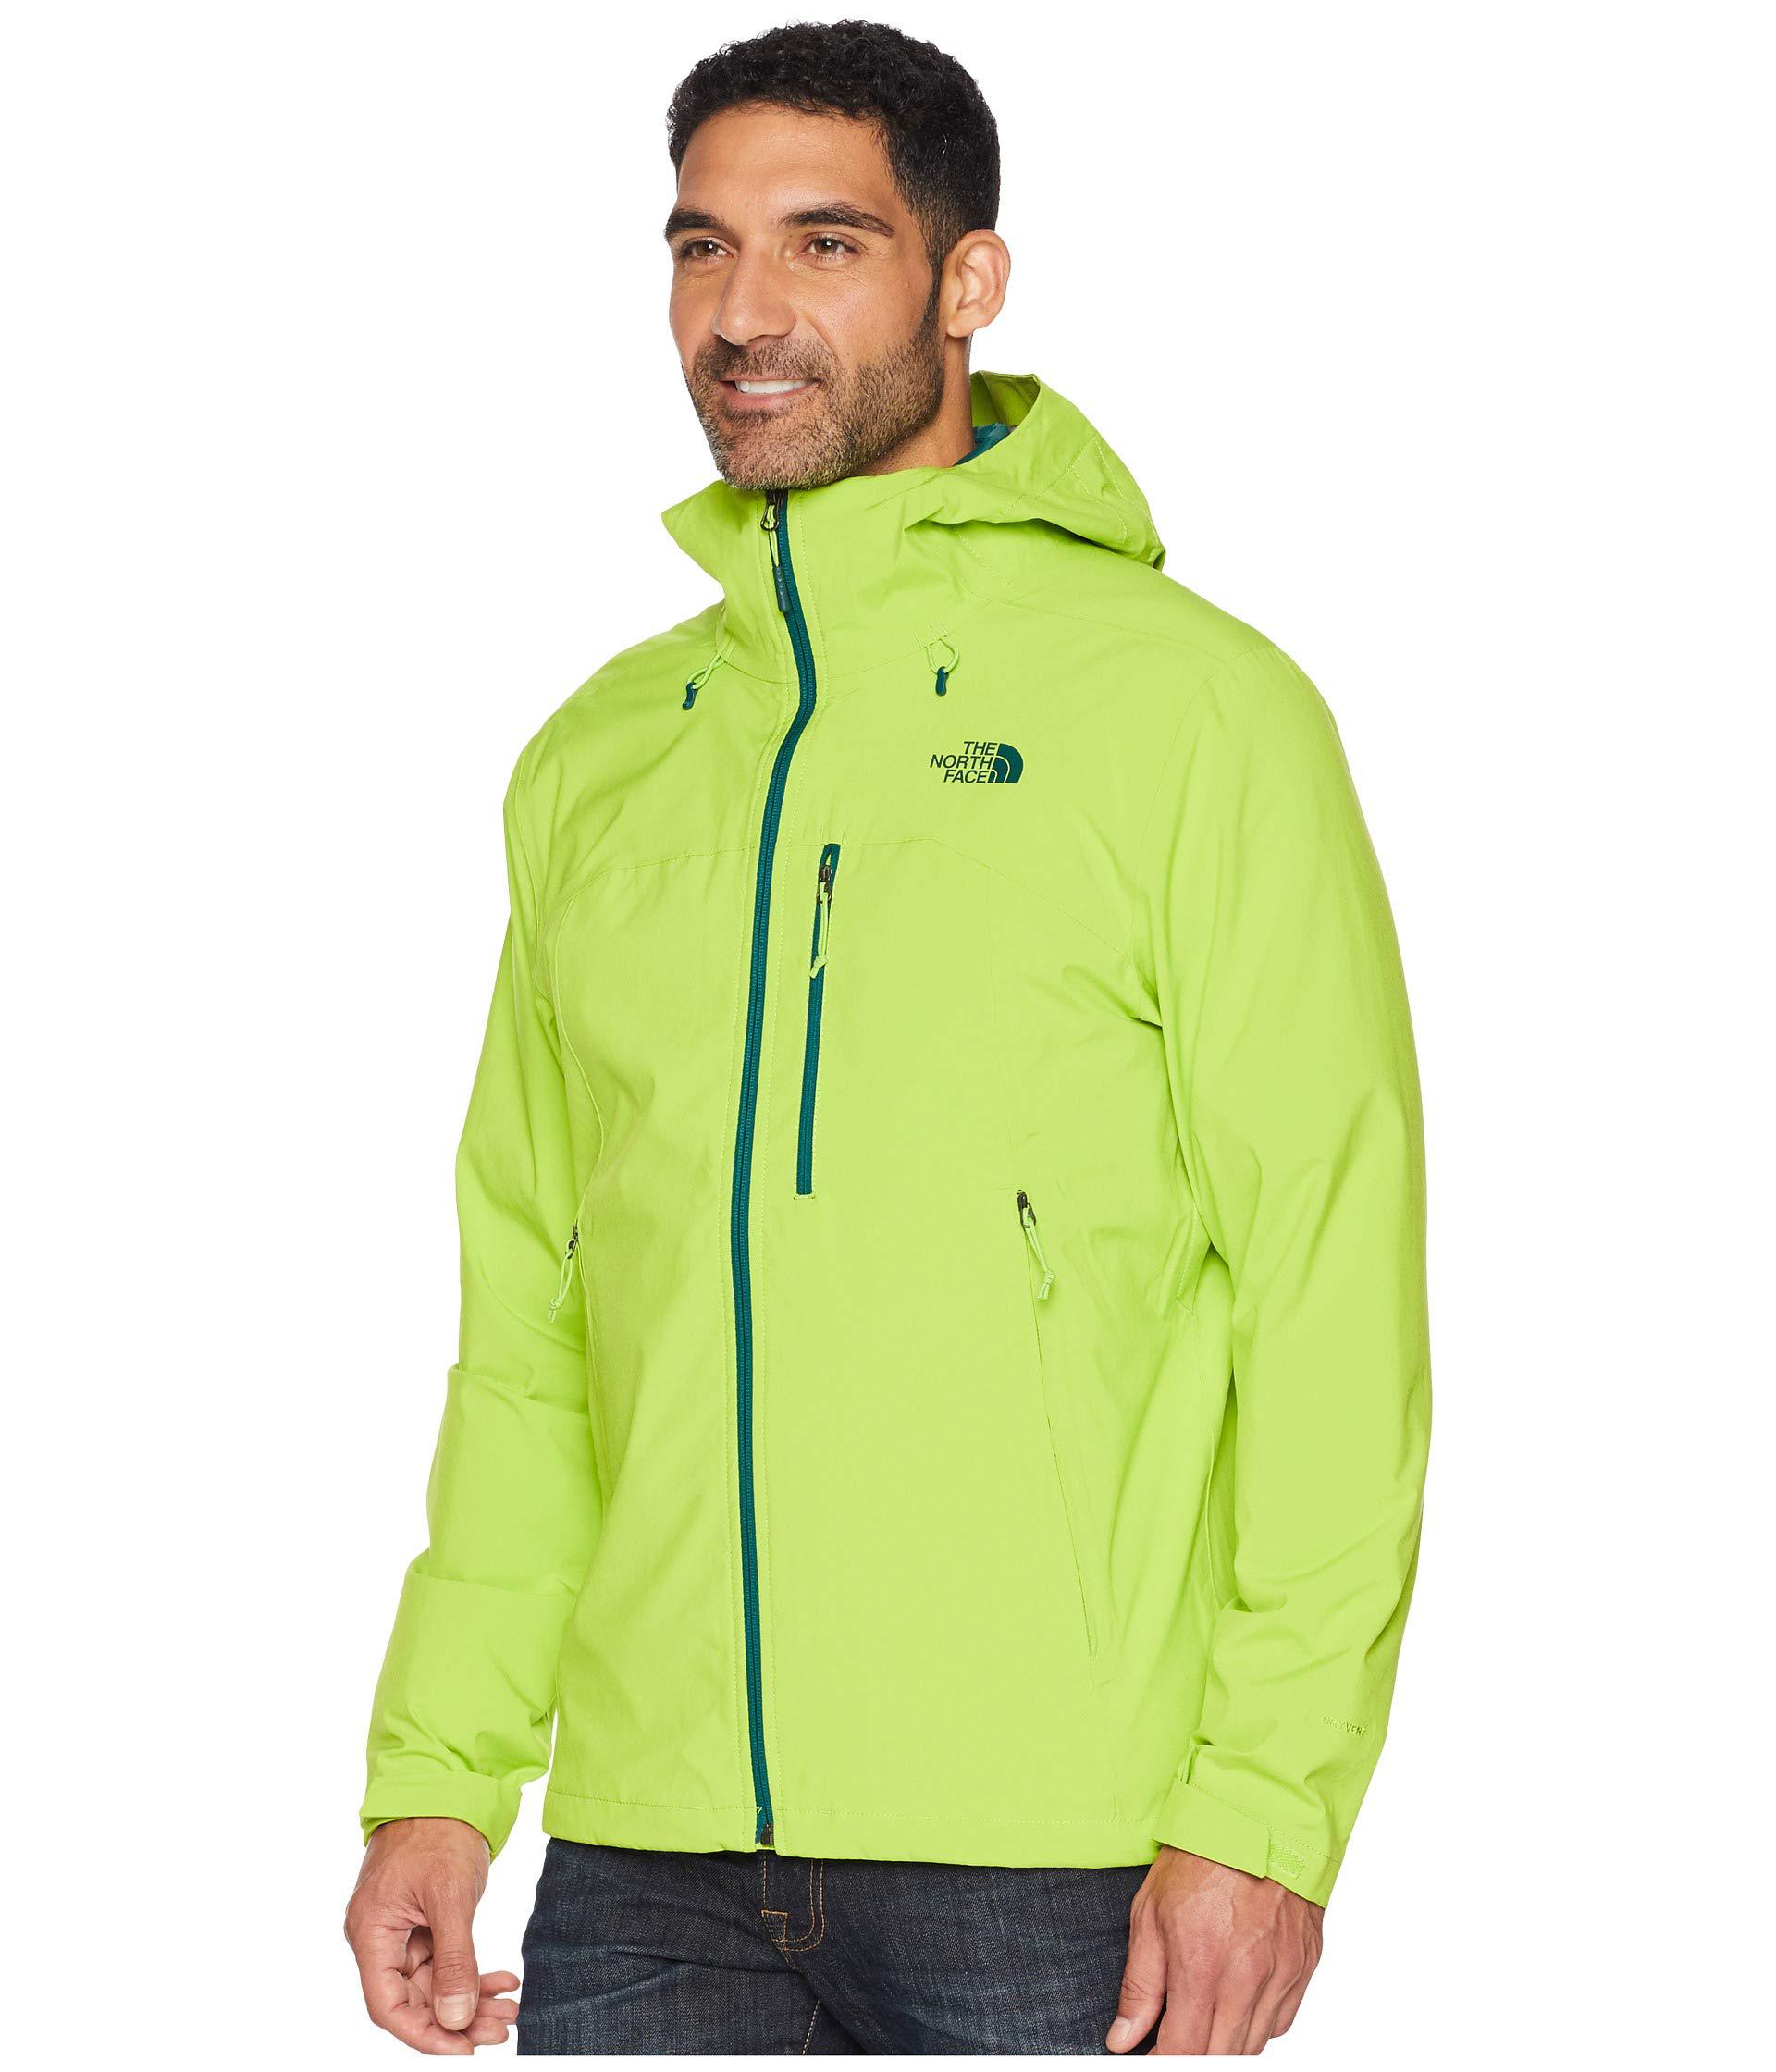 north face lime green